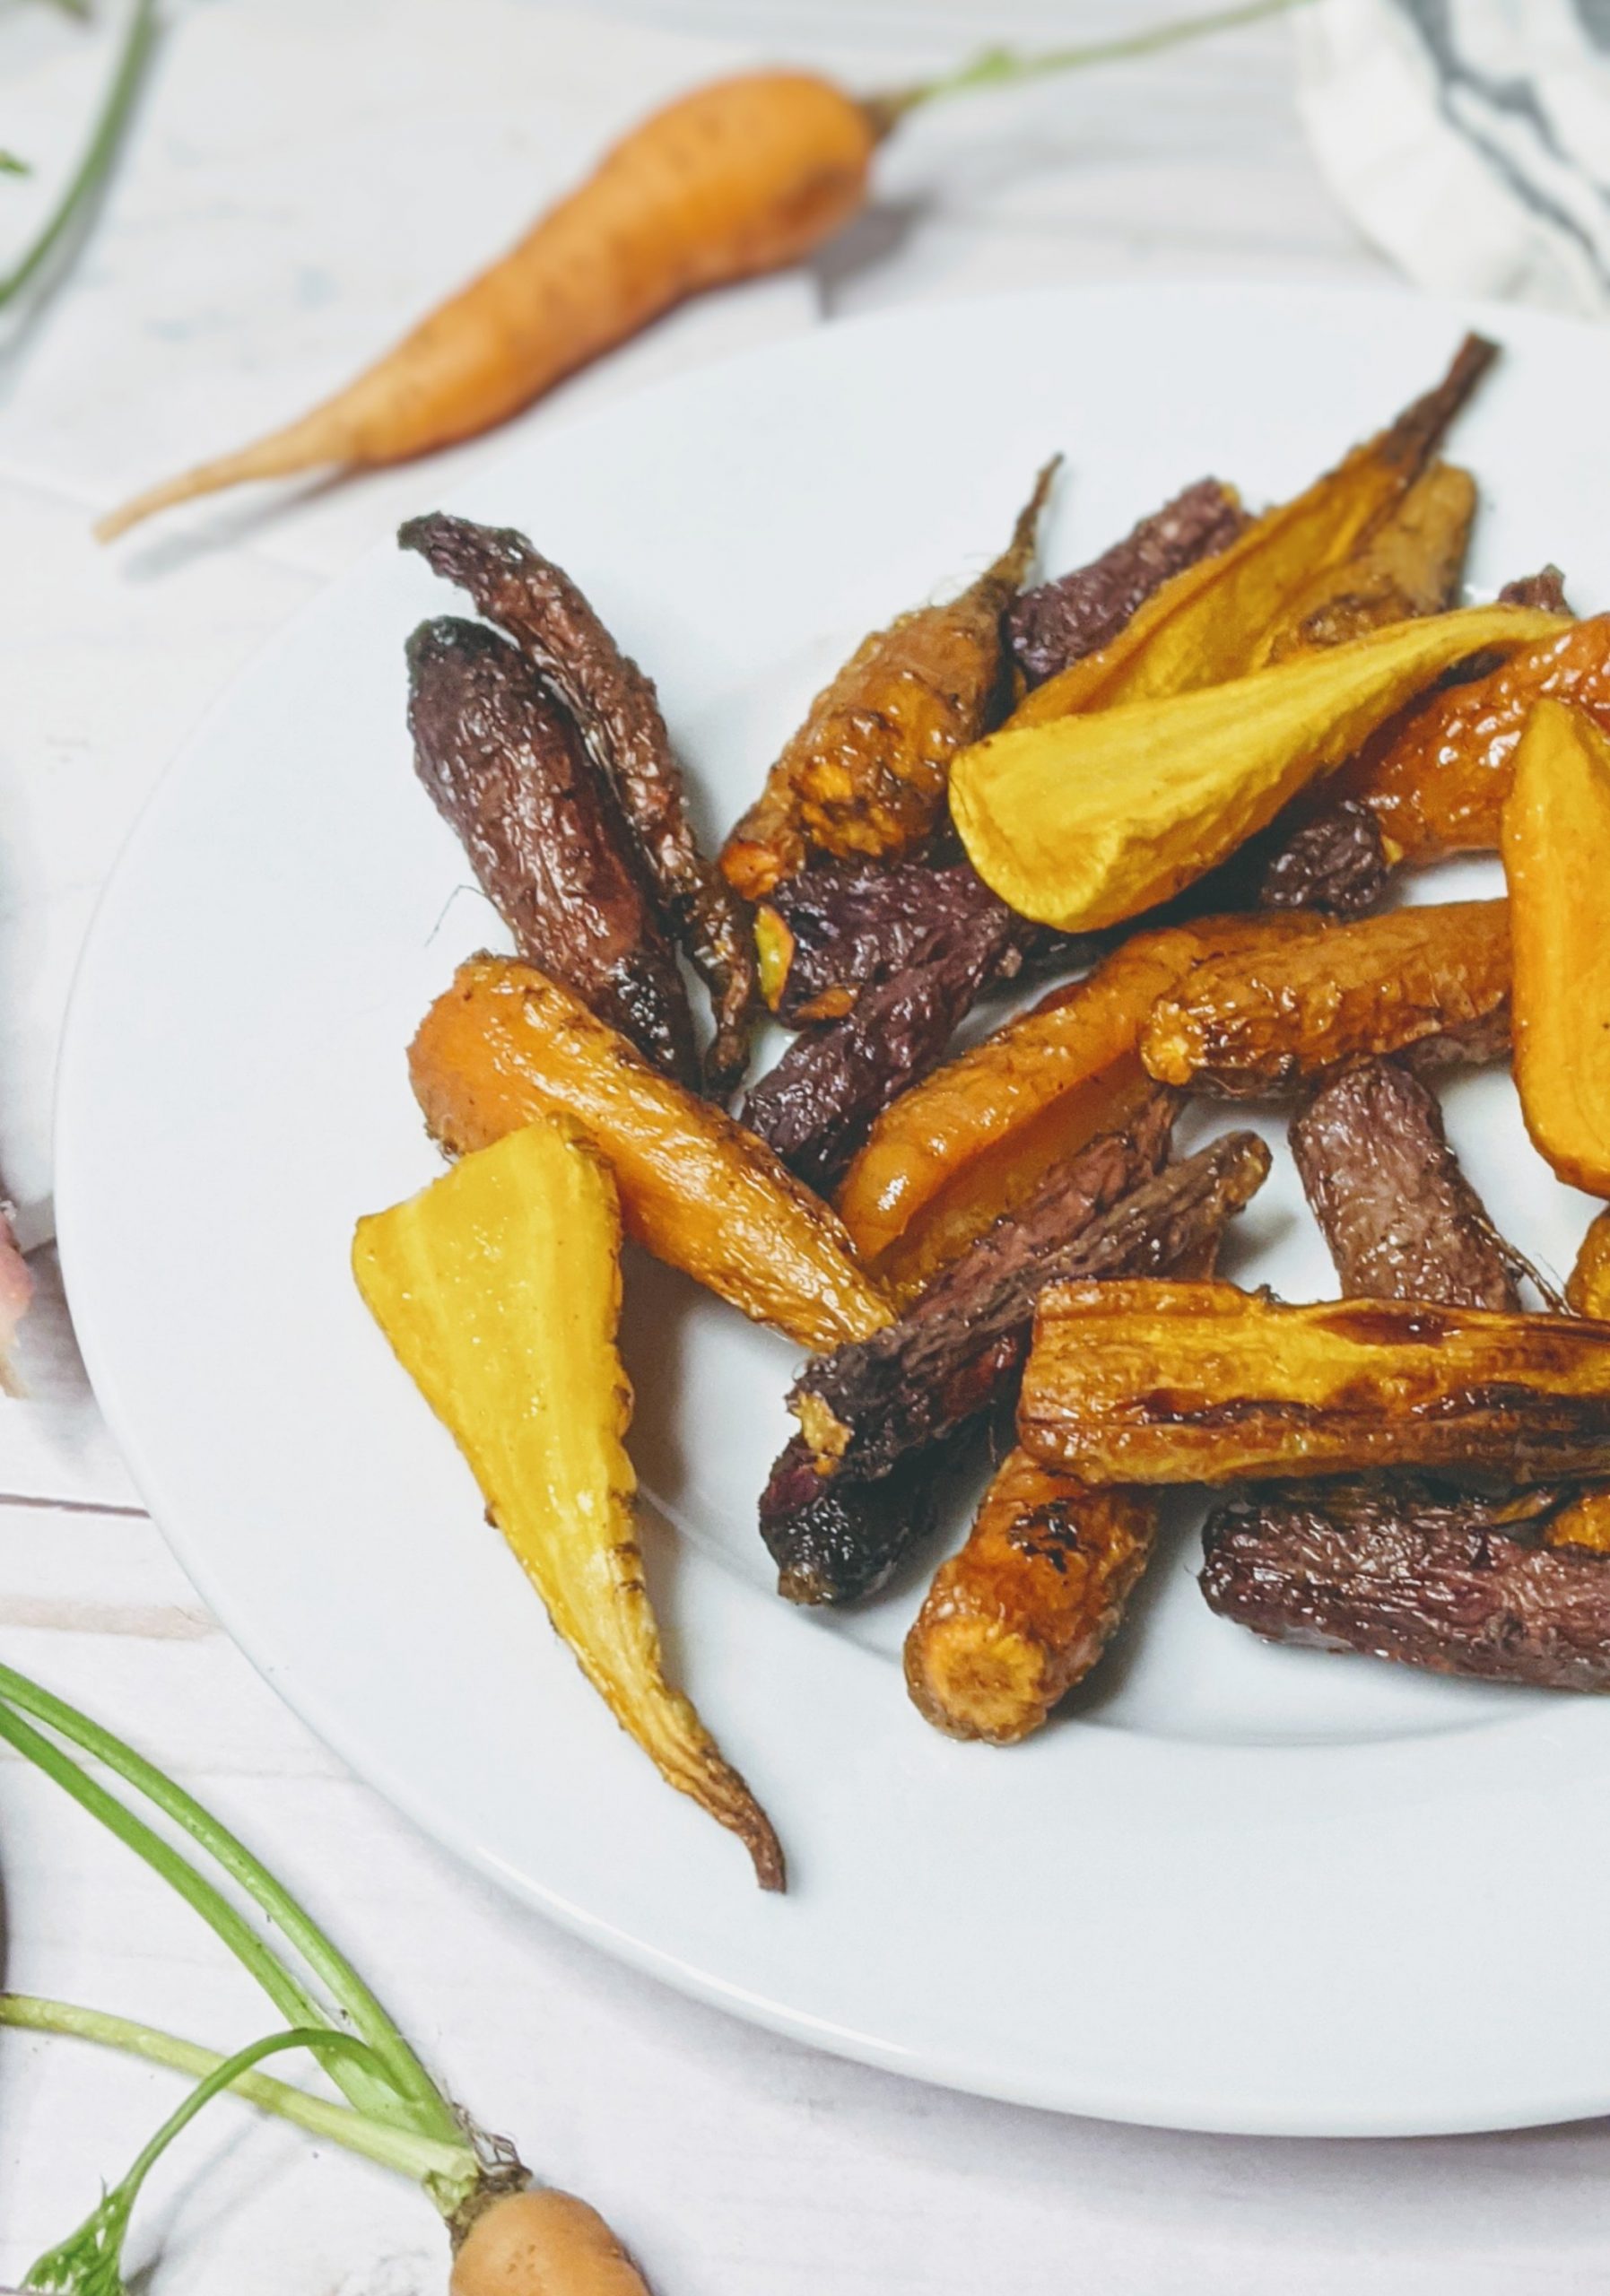 roasted purple carrots orange and yellow carrots recipes baked carrots with honey oil salt and pepper